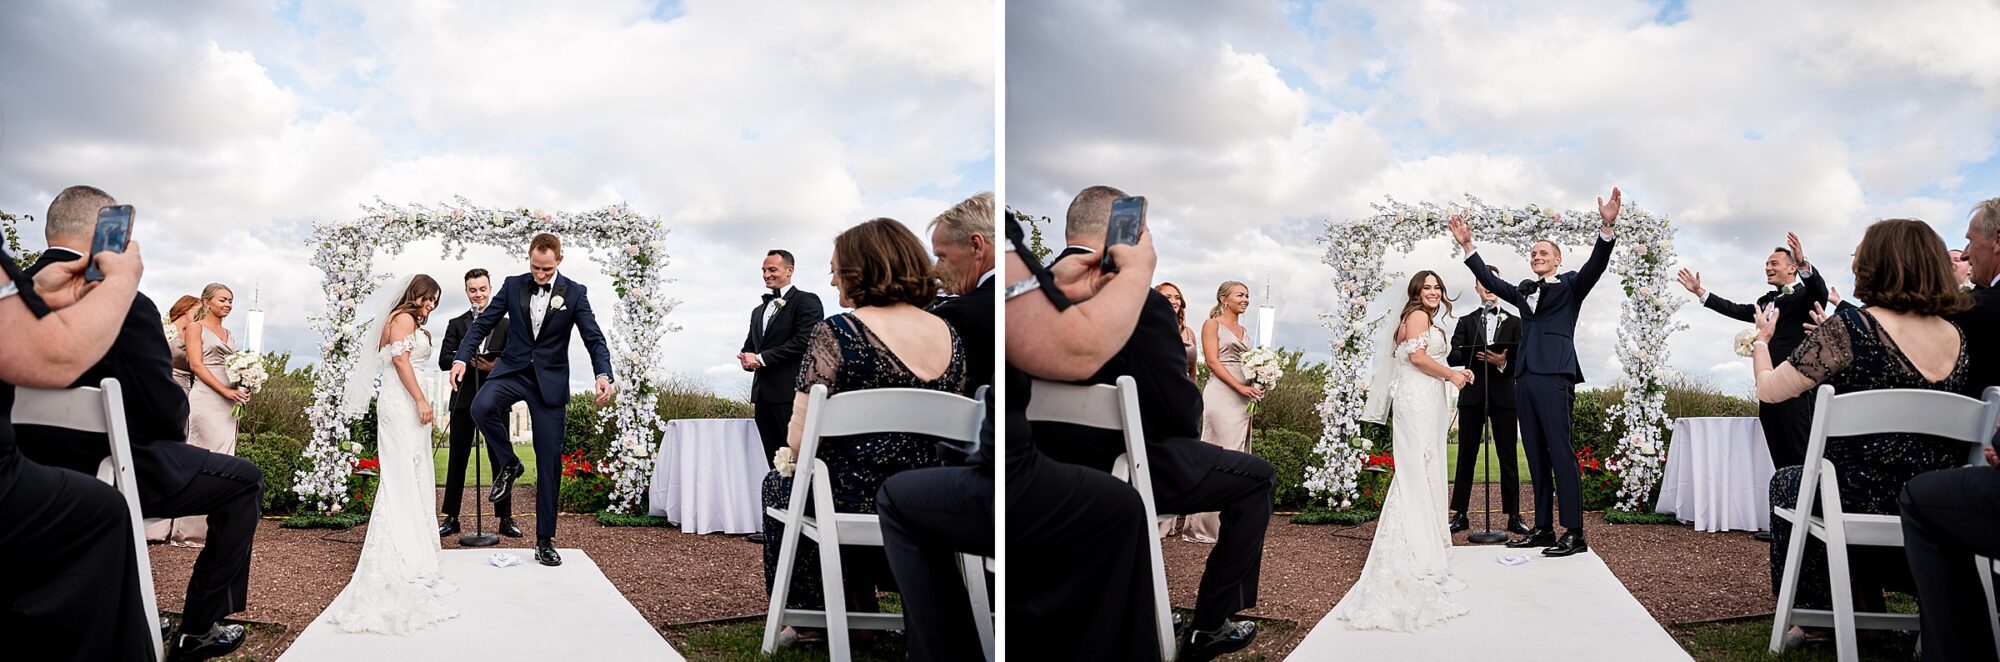 Two pictures of a wedding ceremony with the bride and groom waving.